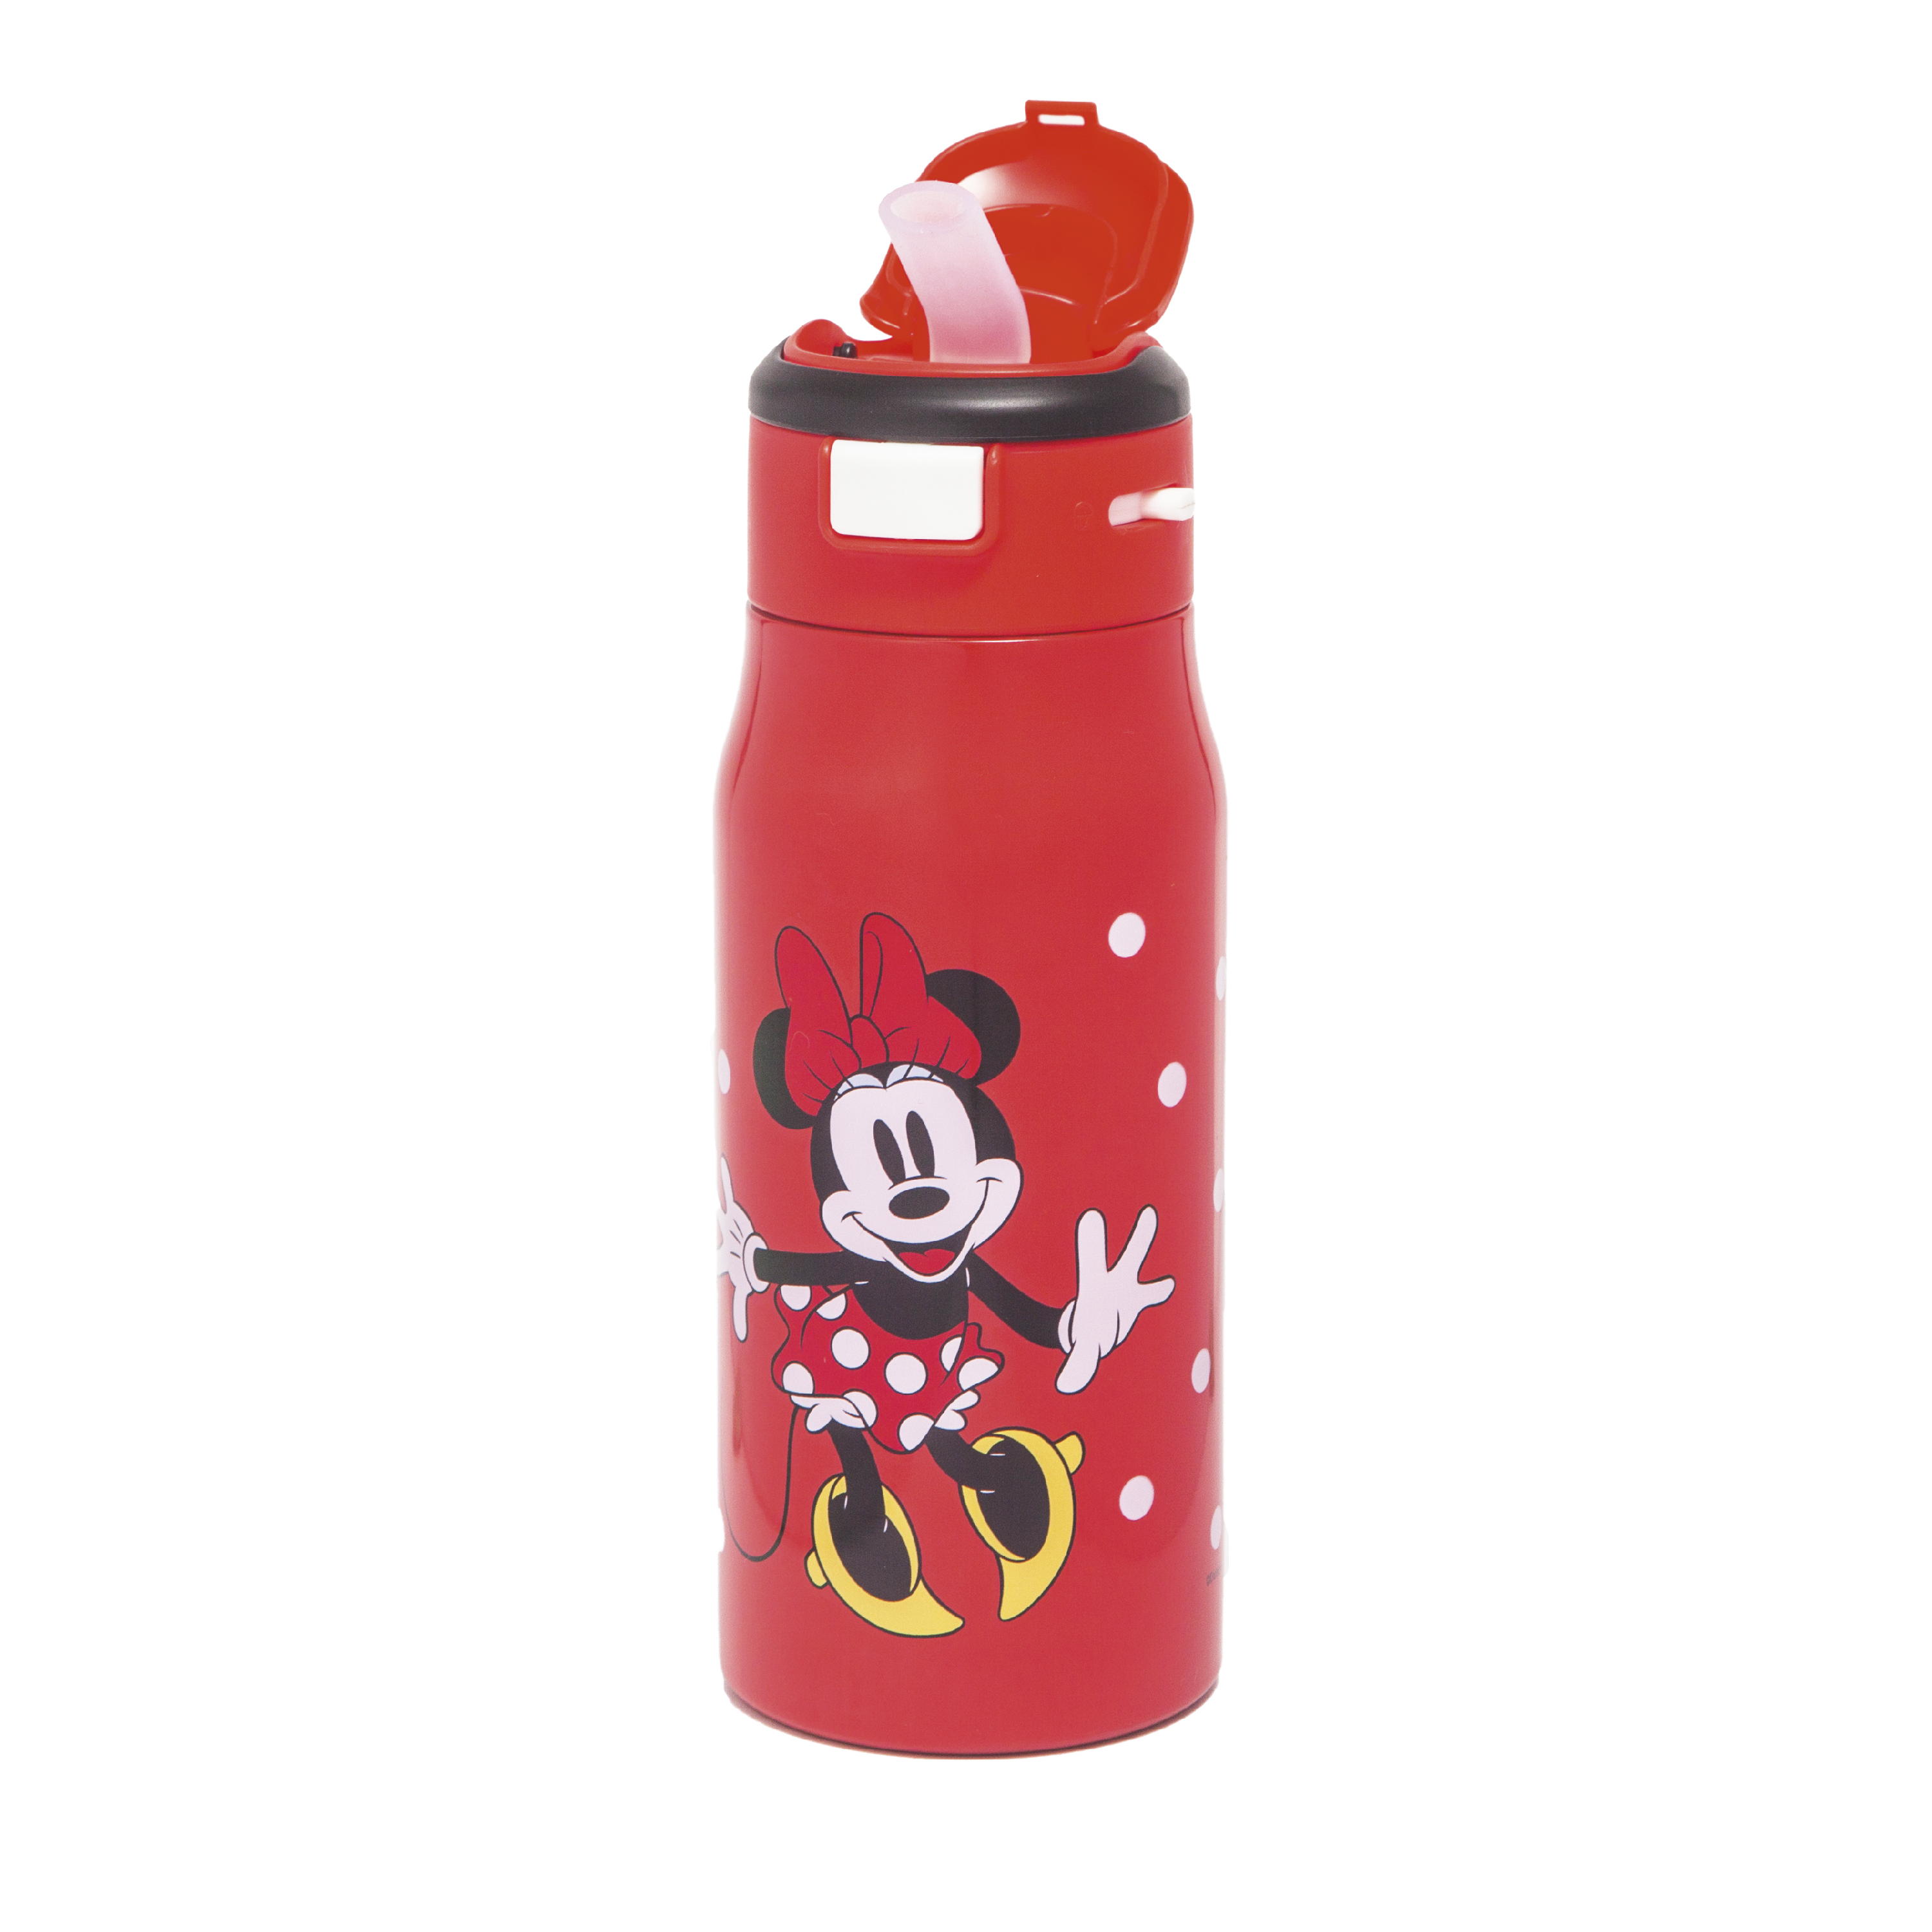 Disney 13.5 ounce Mesa Double Wall Insulated Stainless Steel Water Bottle, Minnie Mouse slideshow image 4